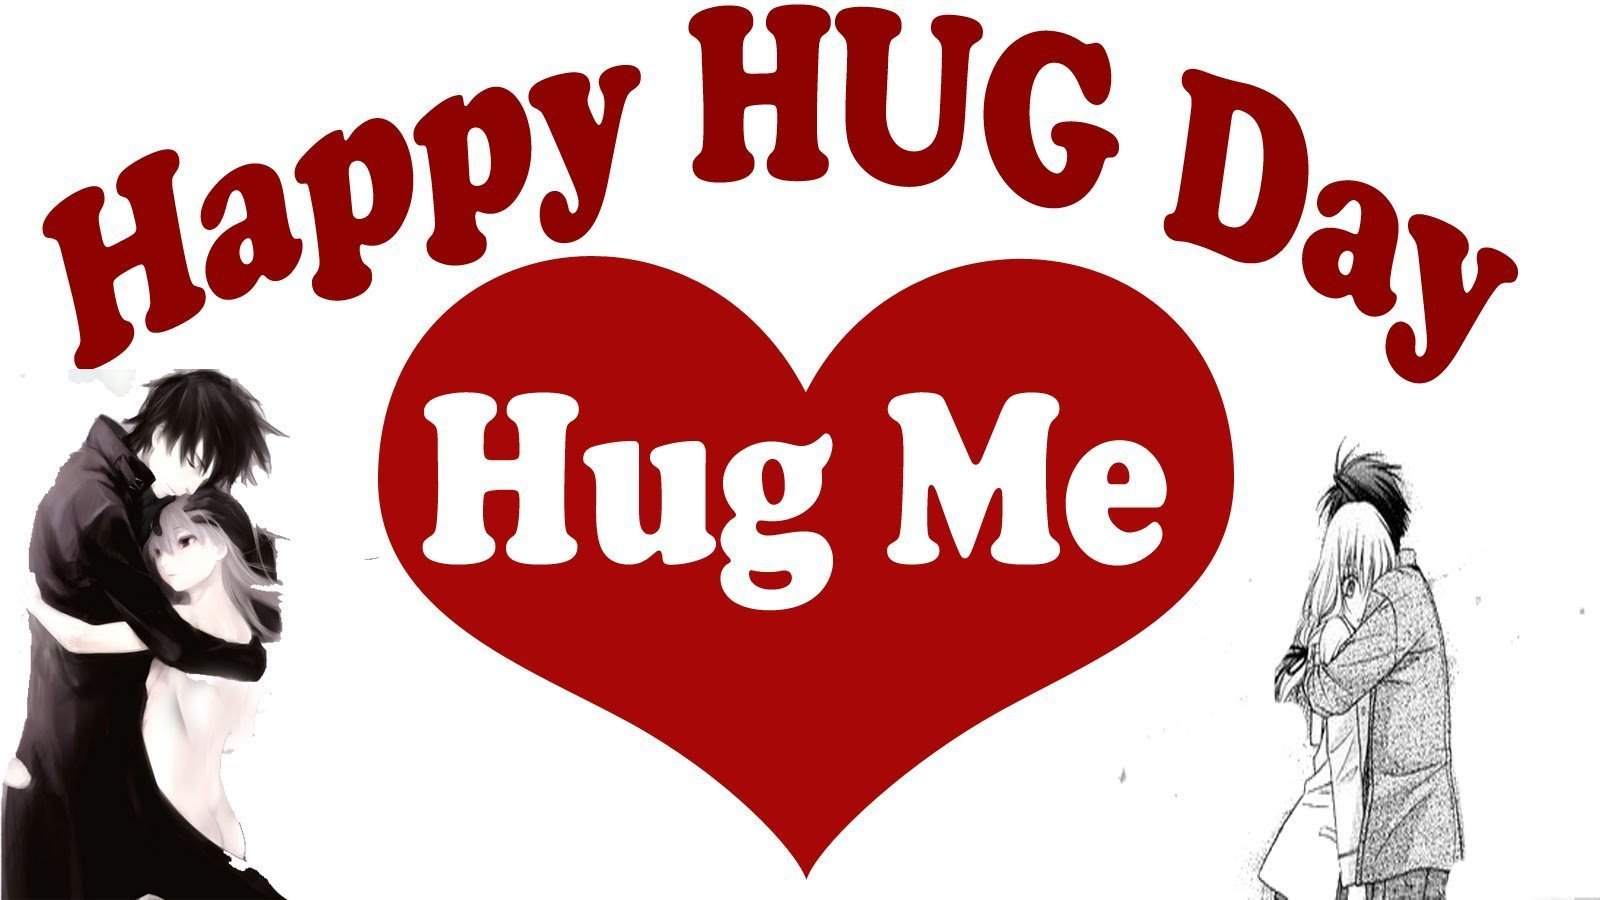 Free download Hug Day Images 2017 FULL HD Pics Wallpapers for ...